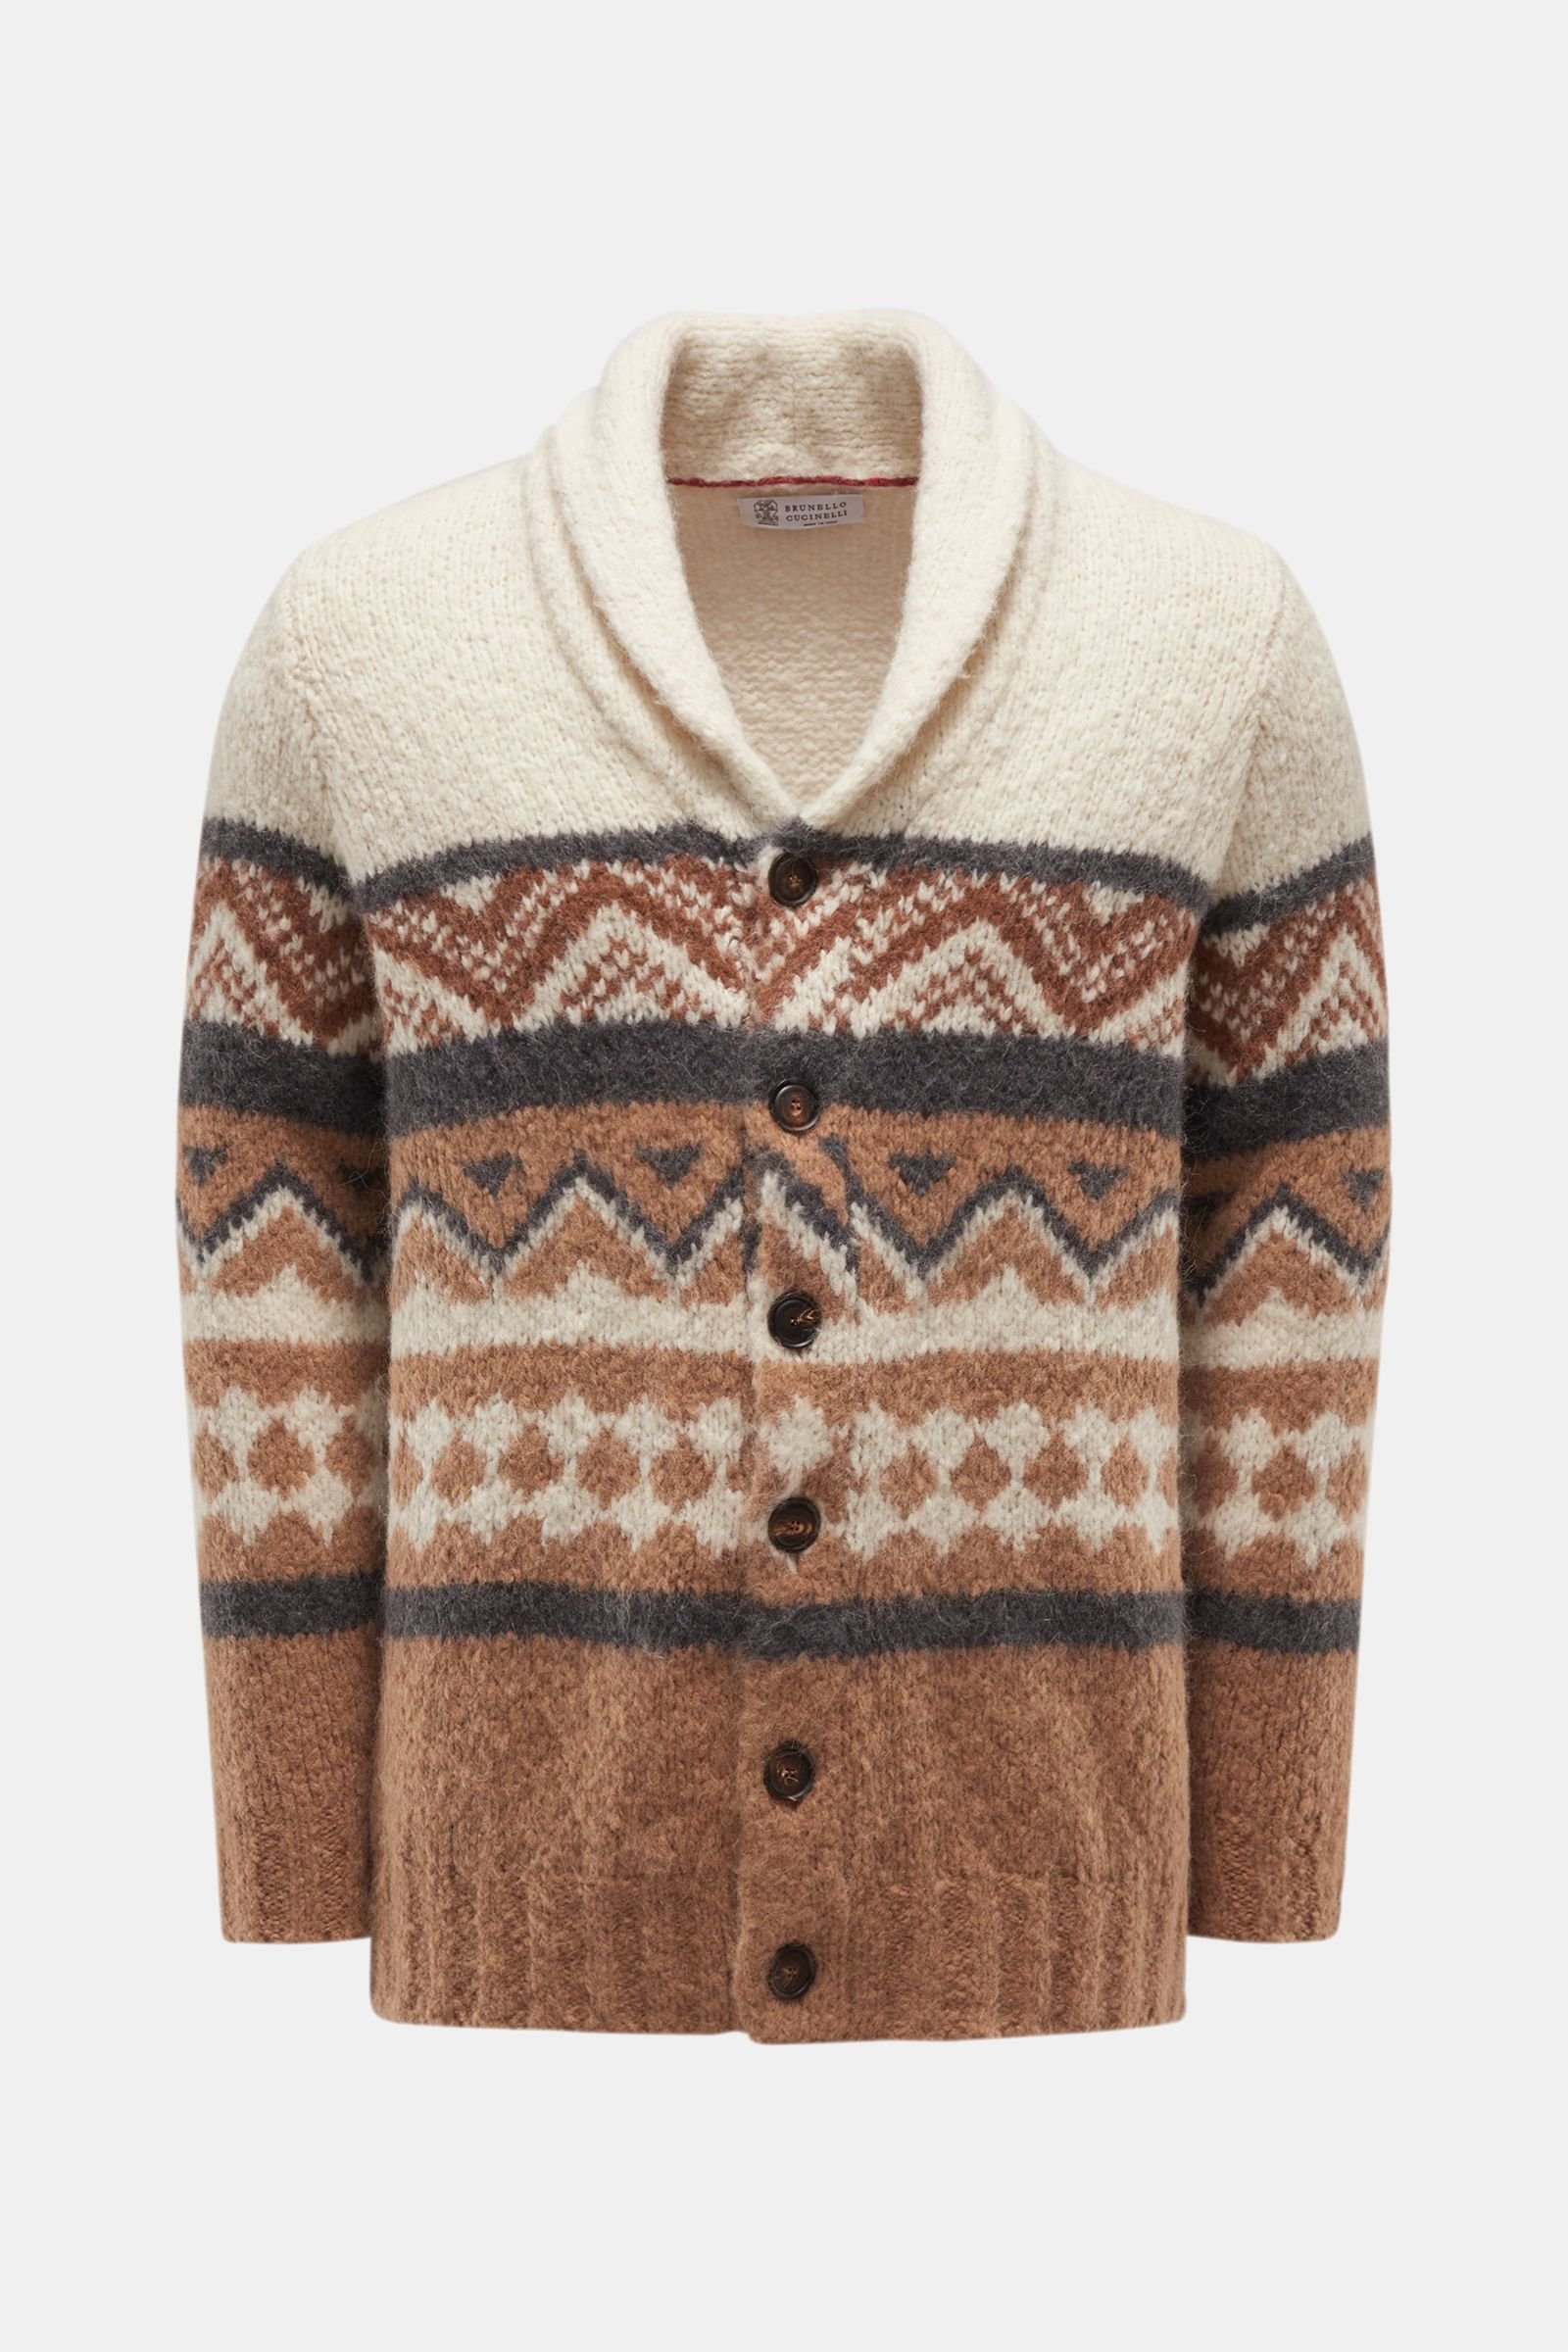 Cashmere cardigan cream/brown patterned